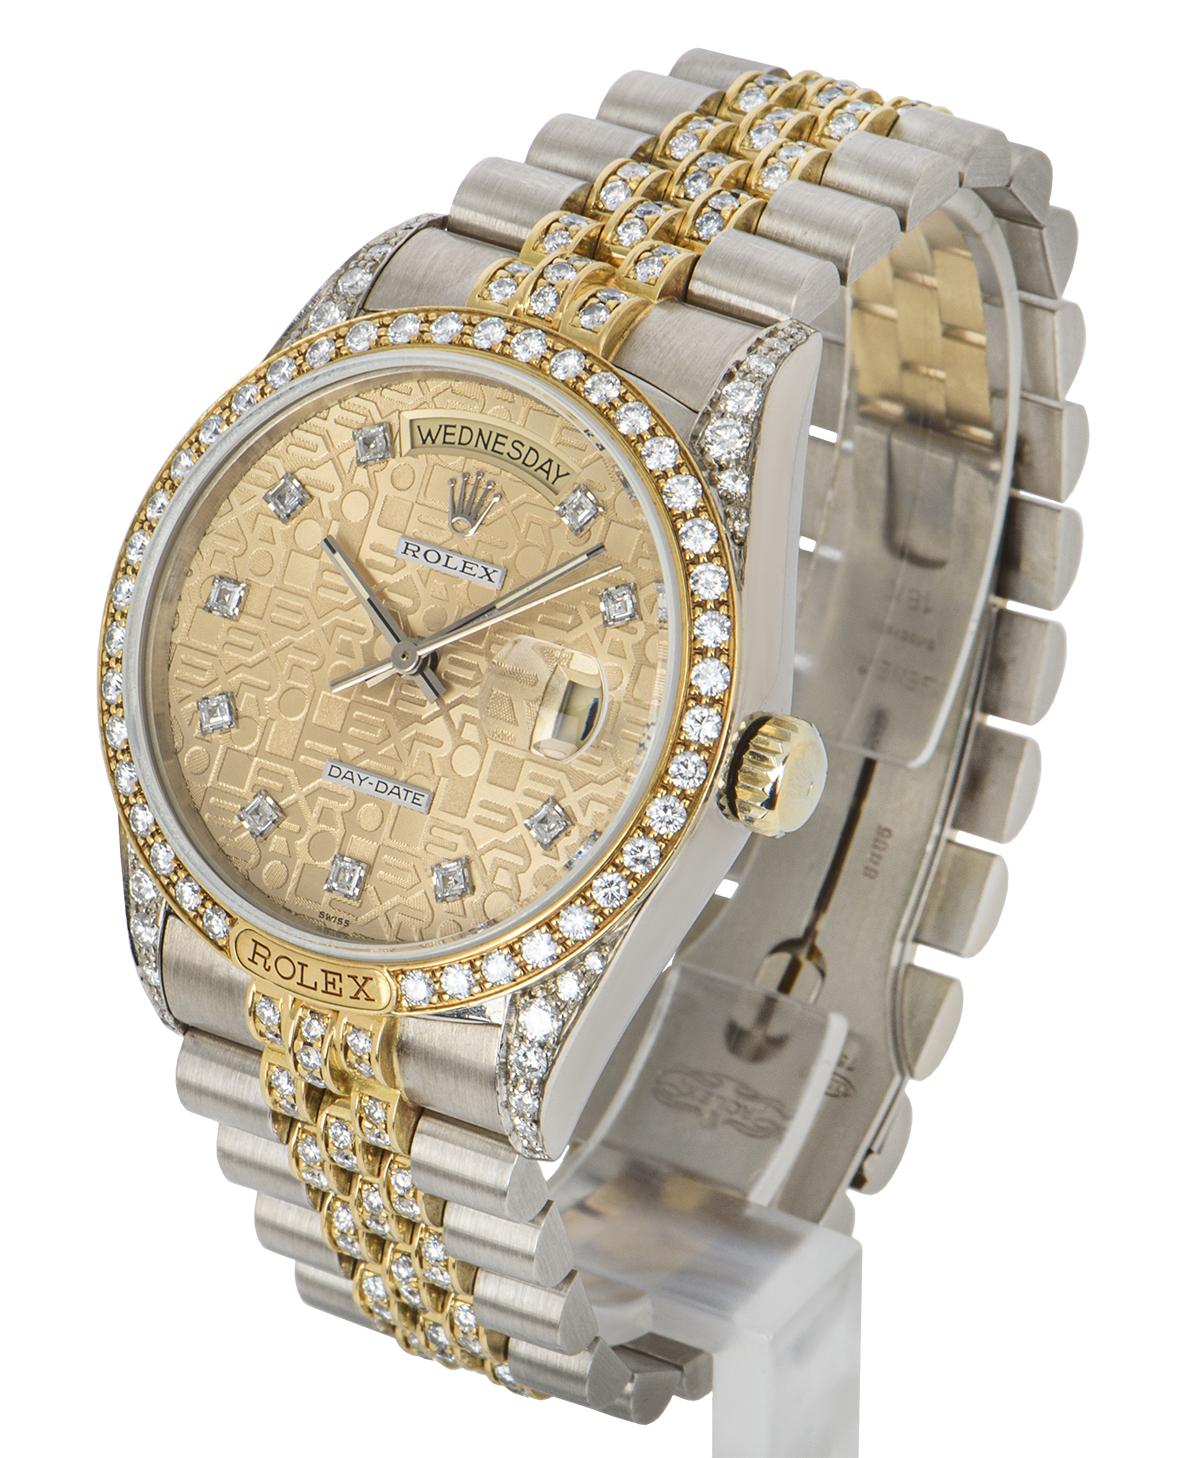 A rare 36mm tridor Day-Date by Rolex, made from white gold and yellow gold, featuring a rose Jubilee dial set with 10 round brilliant cut diamond hour markers. Set with 40 round brilliant cut diamonds is the bezel with the case and lugs set with a